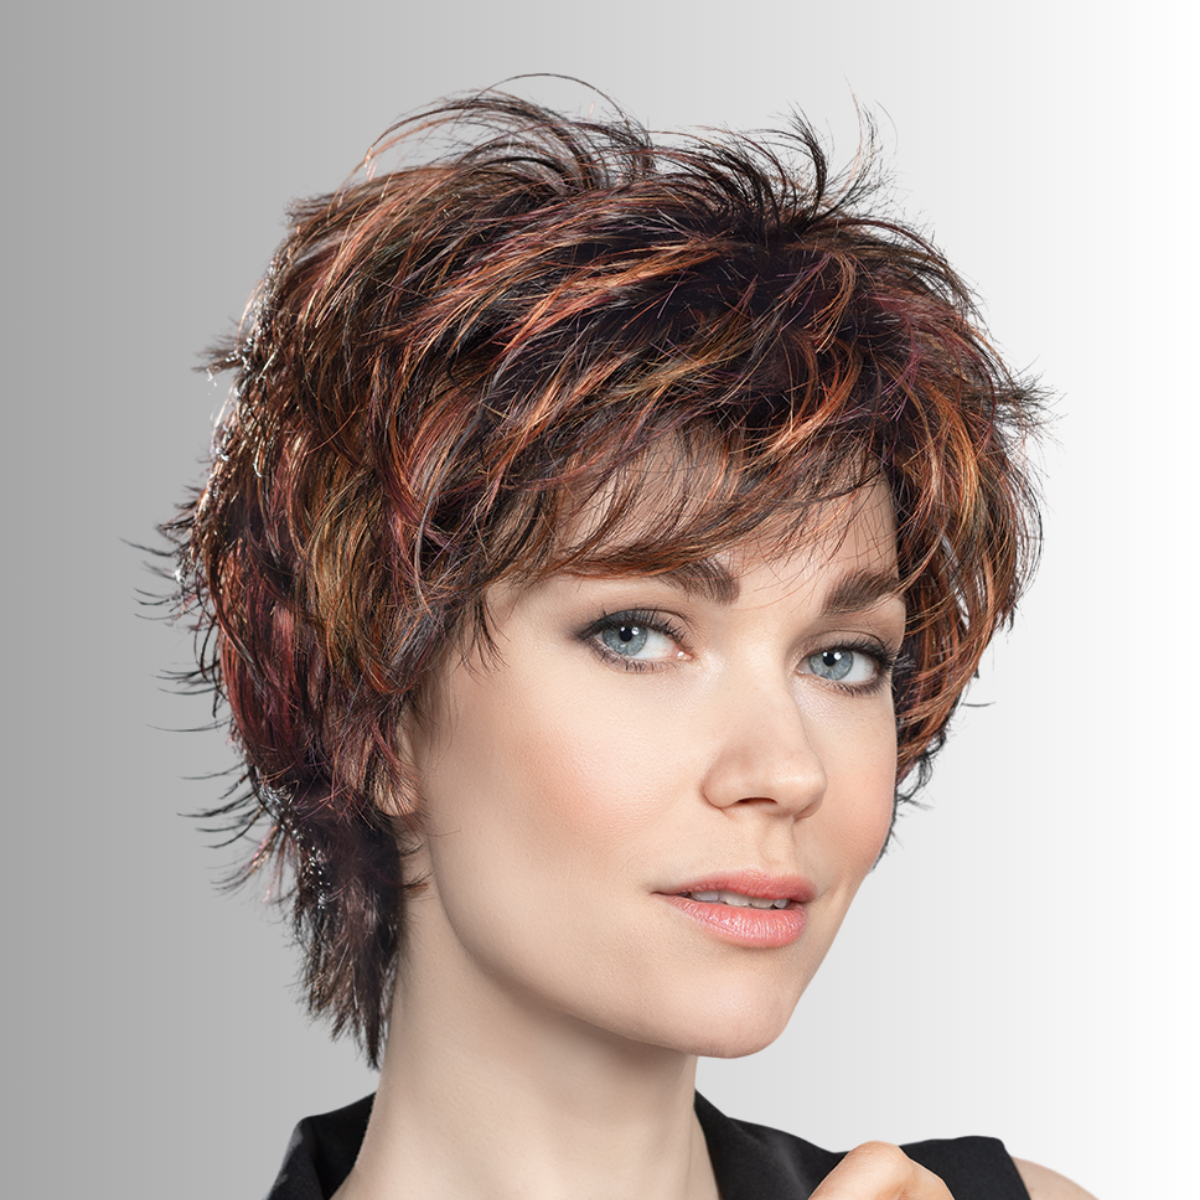 Click - Hair Power Collection by Ellen Wille